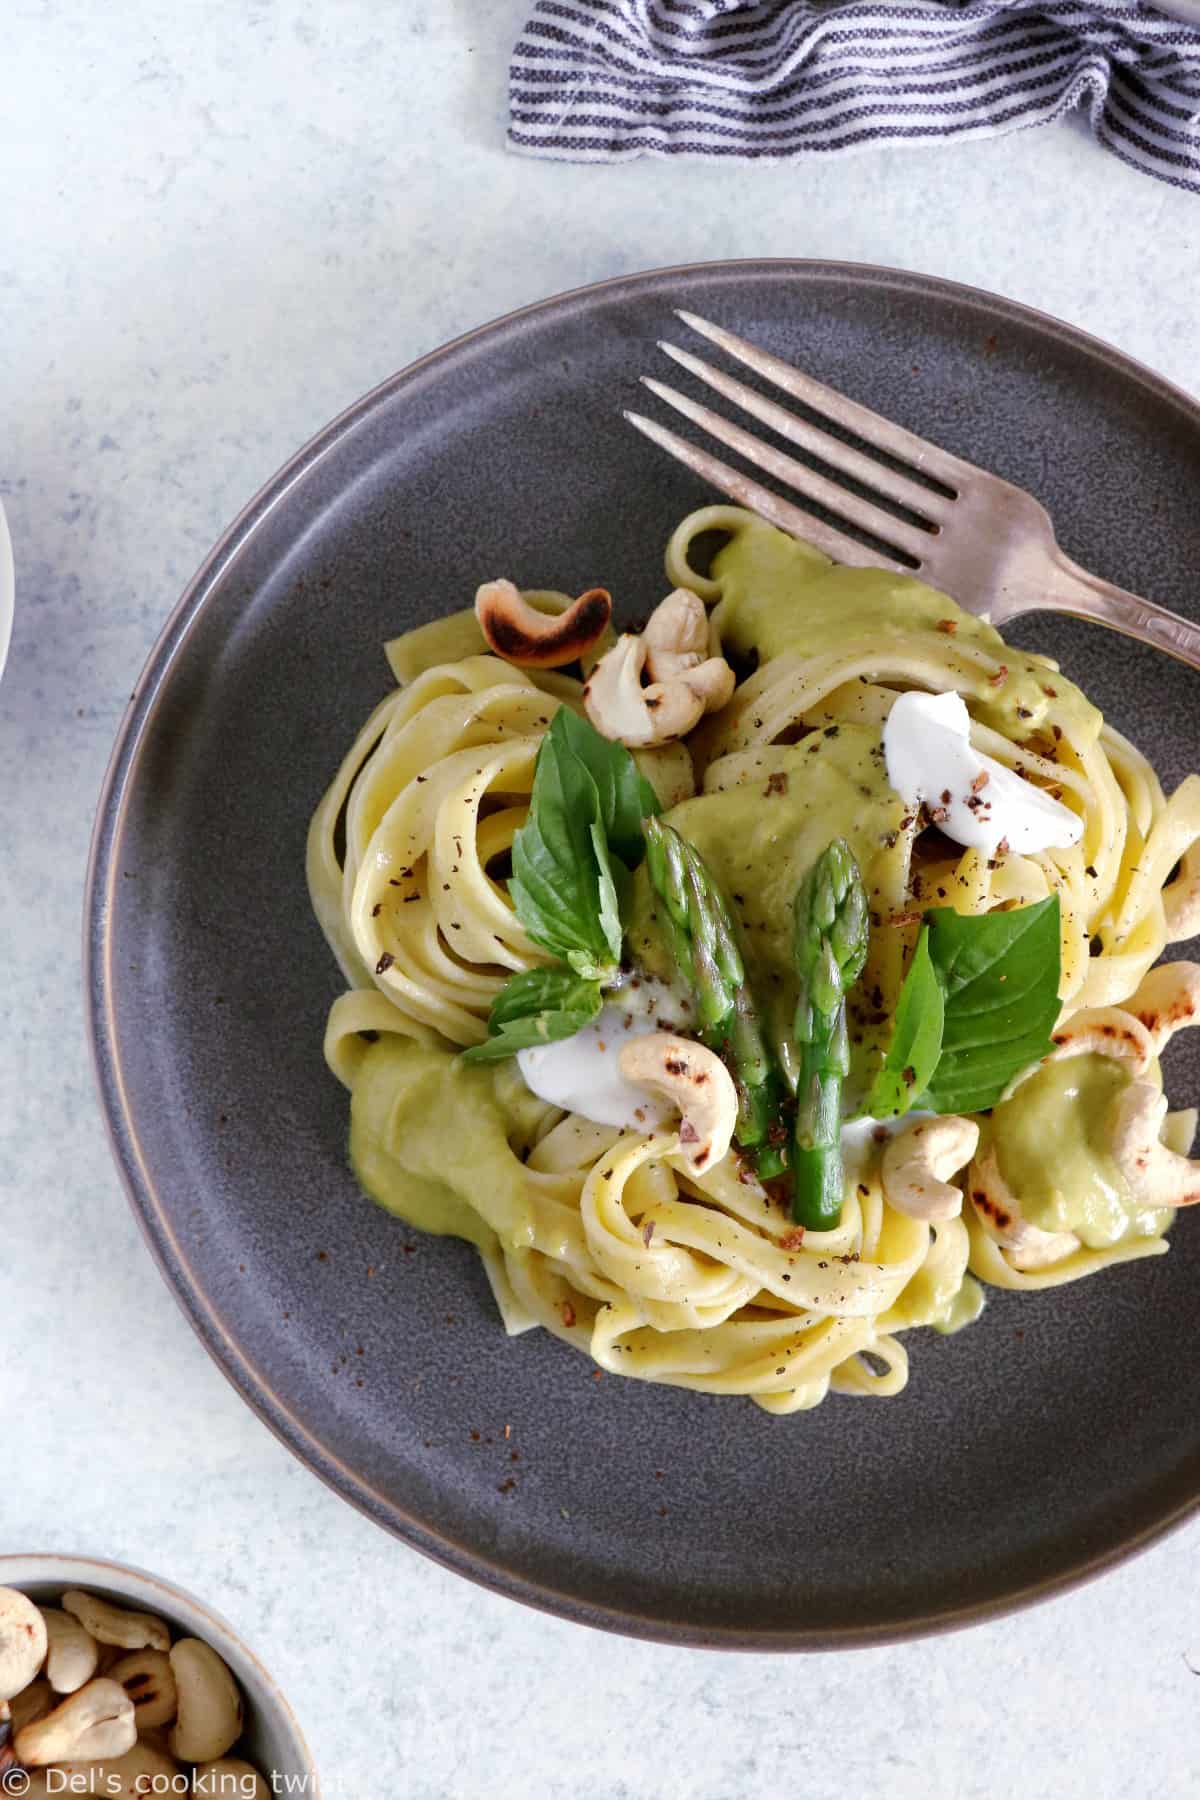 Fancy some fusion cuisine today? Try this Thai green curry asparagus pasta, an elegant yet easy meal that combines the best of Thai food and Italian cuisine, with a fresh spring touch.